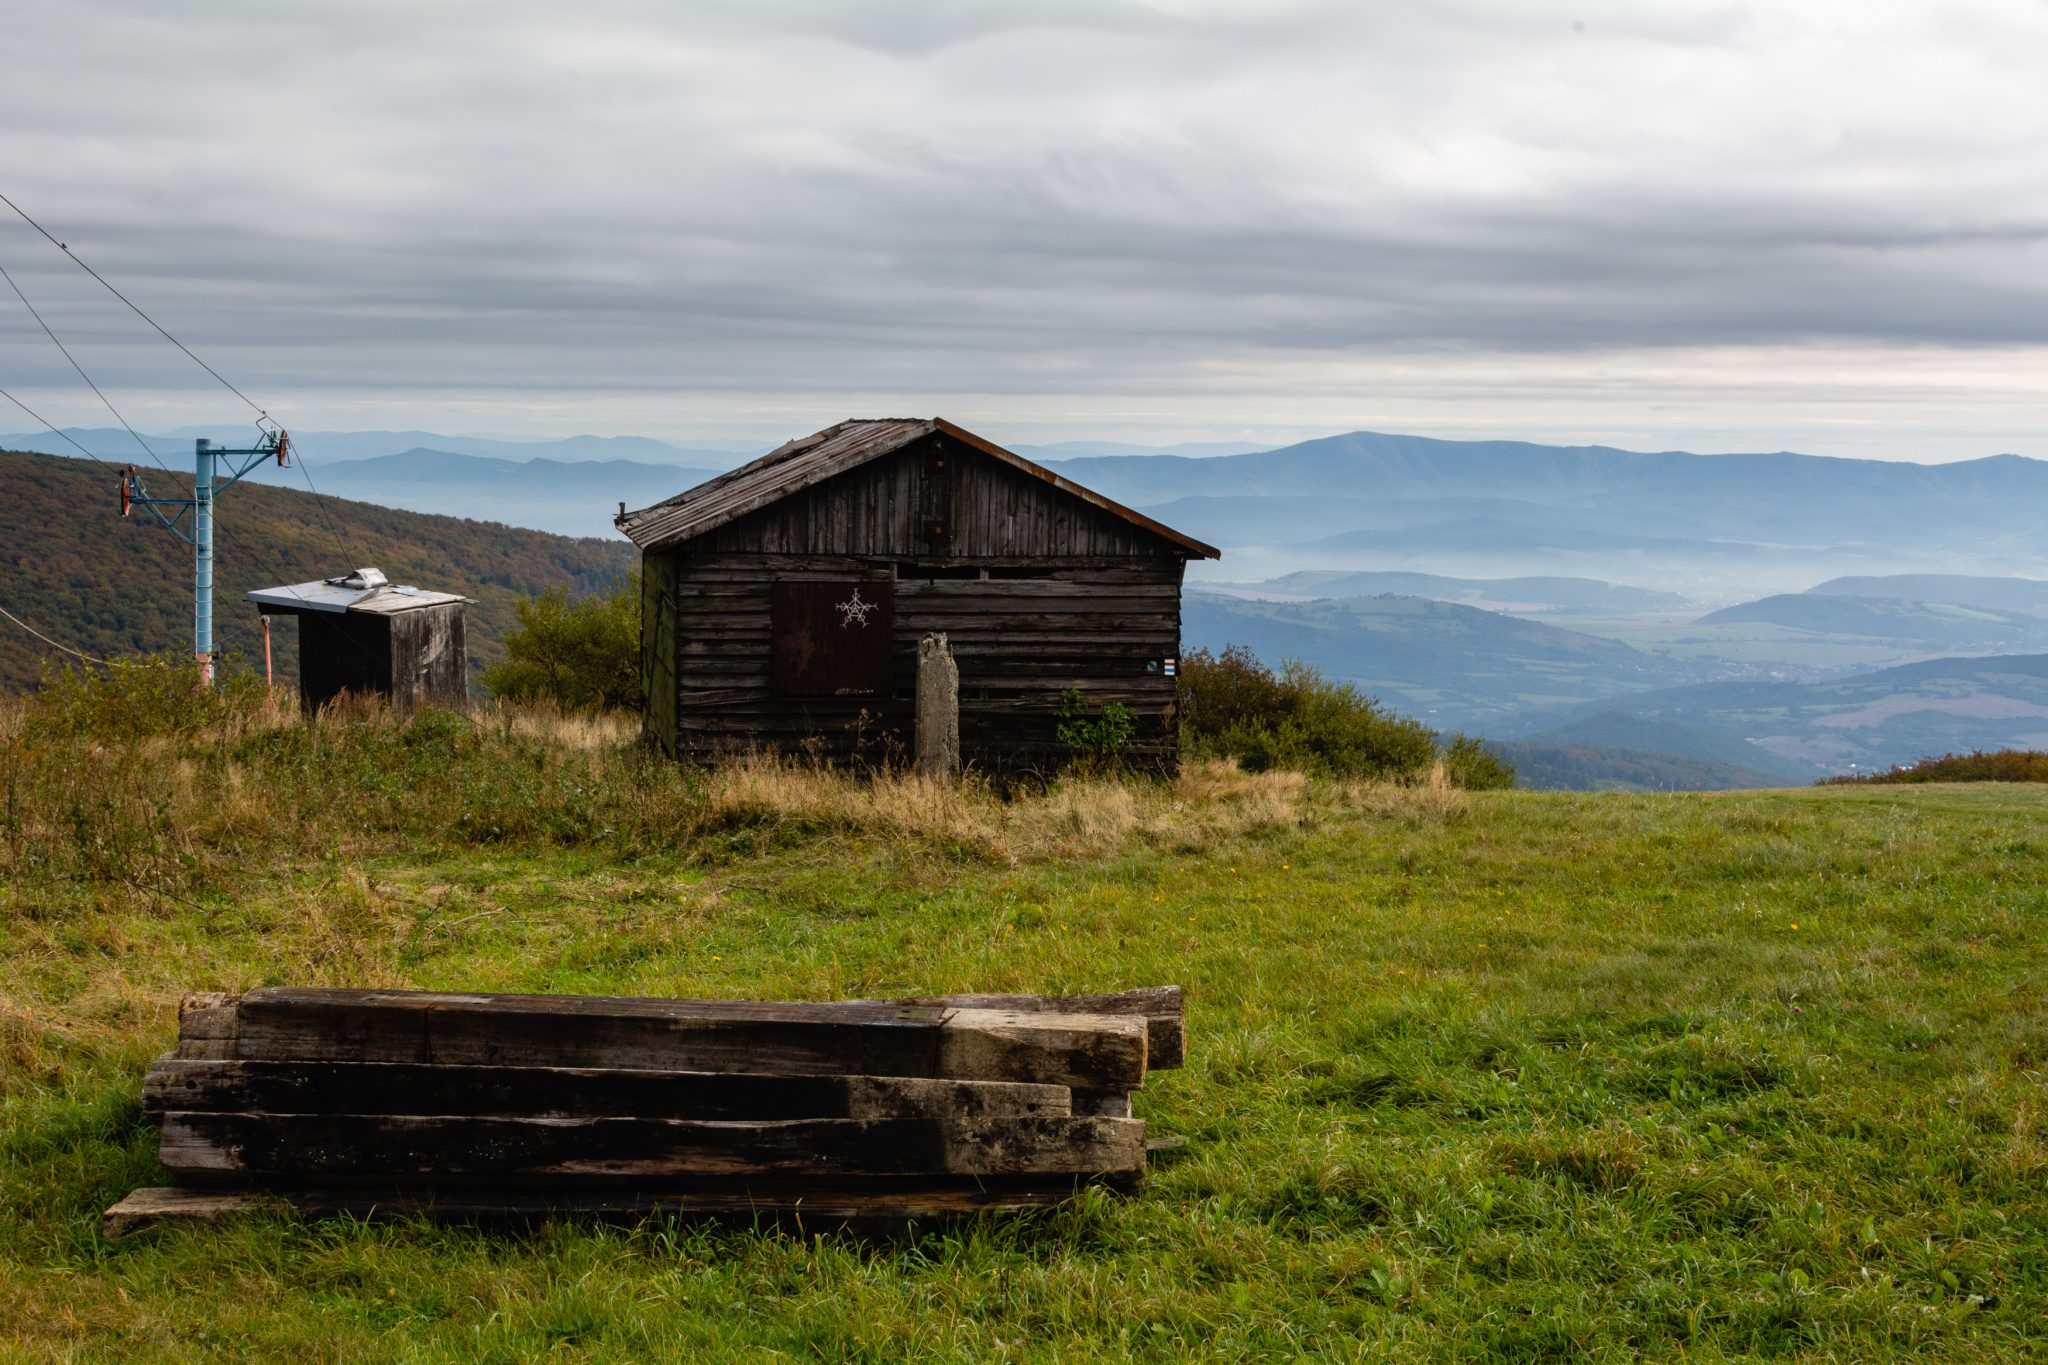 Old Wooden Log Cabin in the Mountains | Free Stock Photo | LibreShot